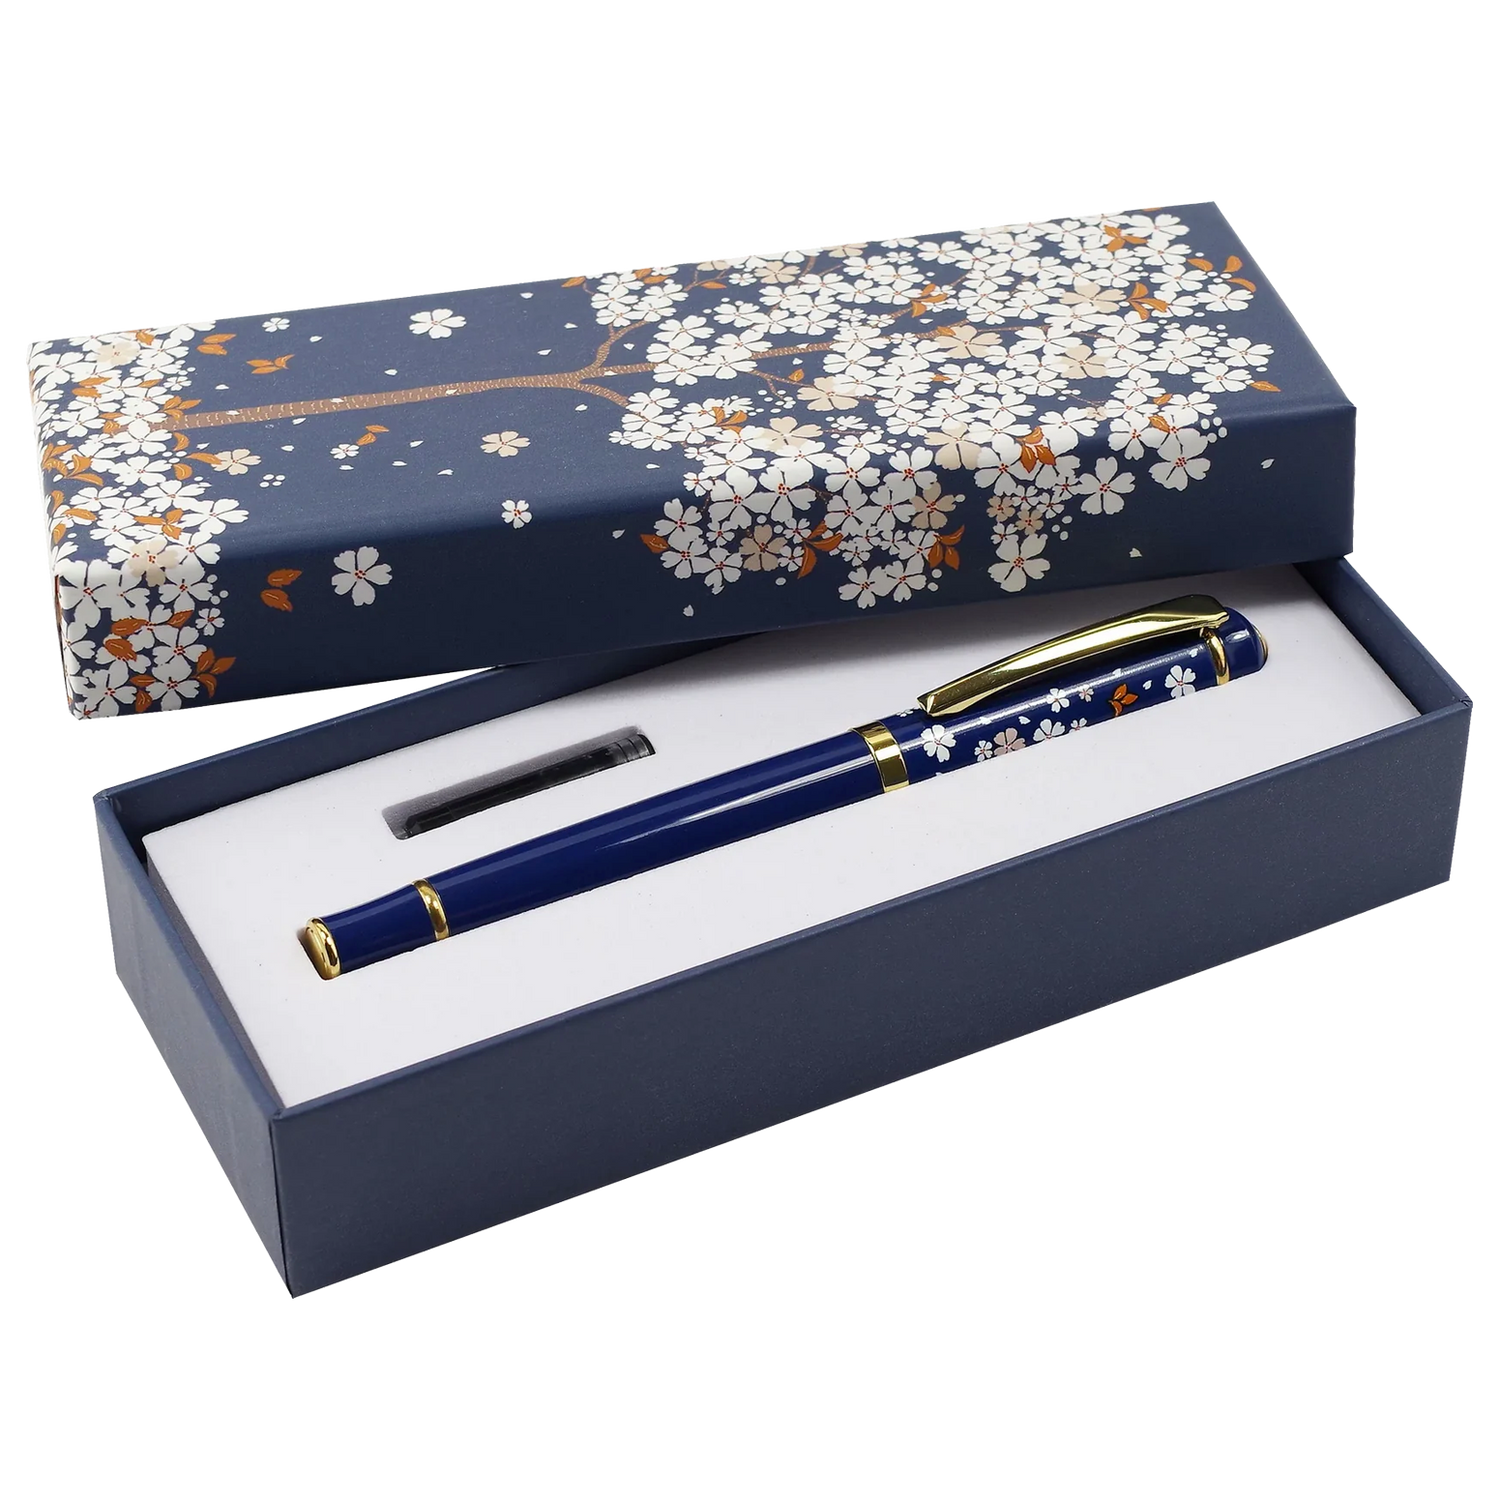 Falling Blossoms Fountain Pen - Home Works